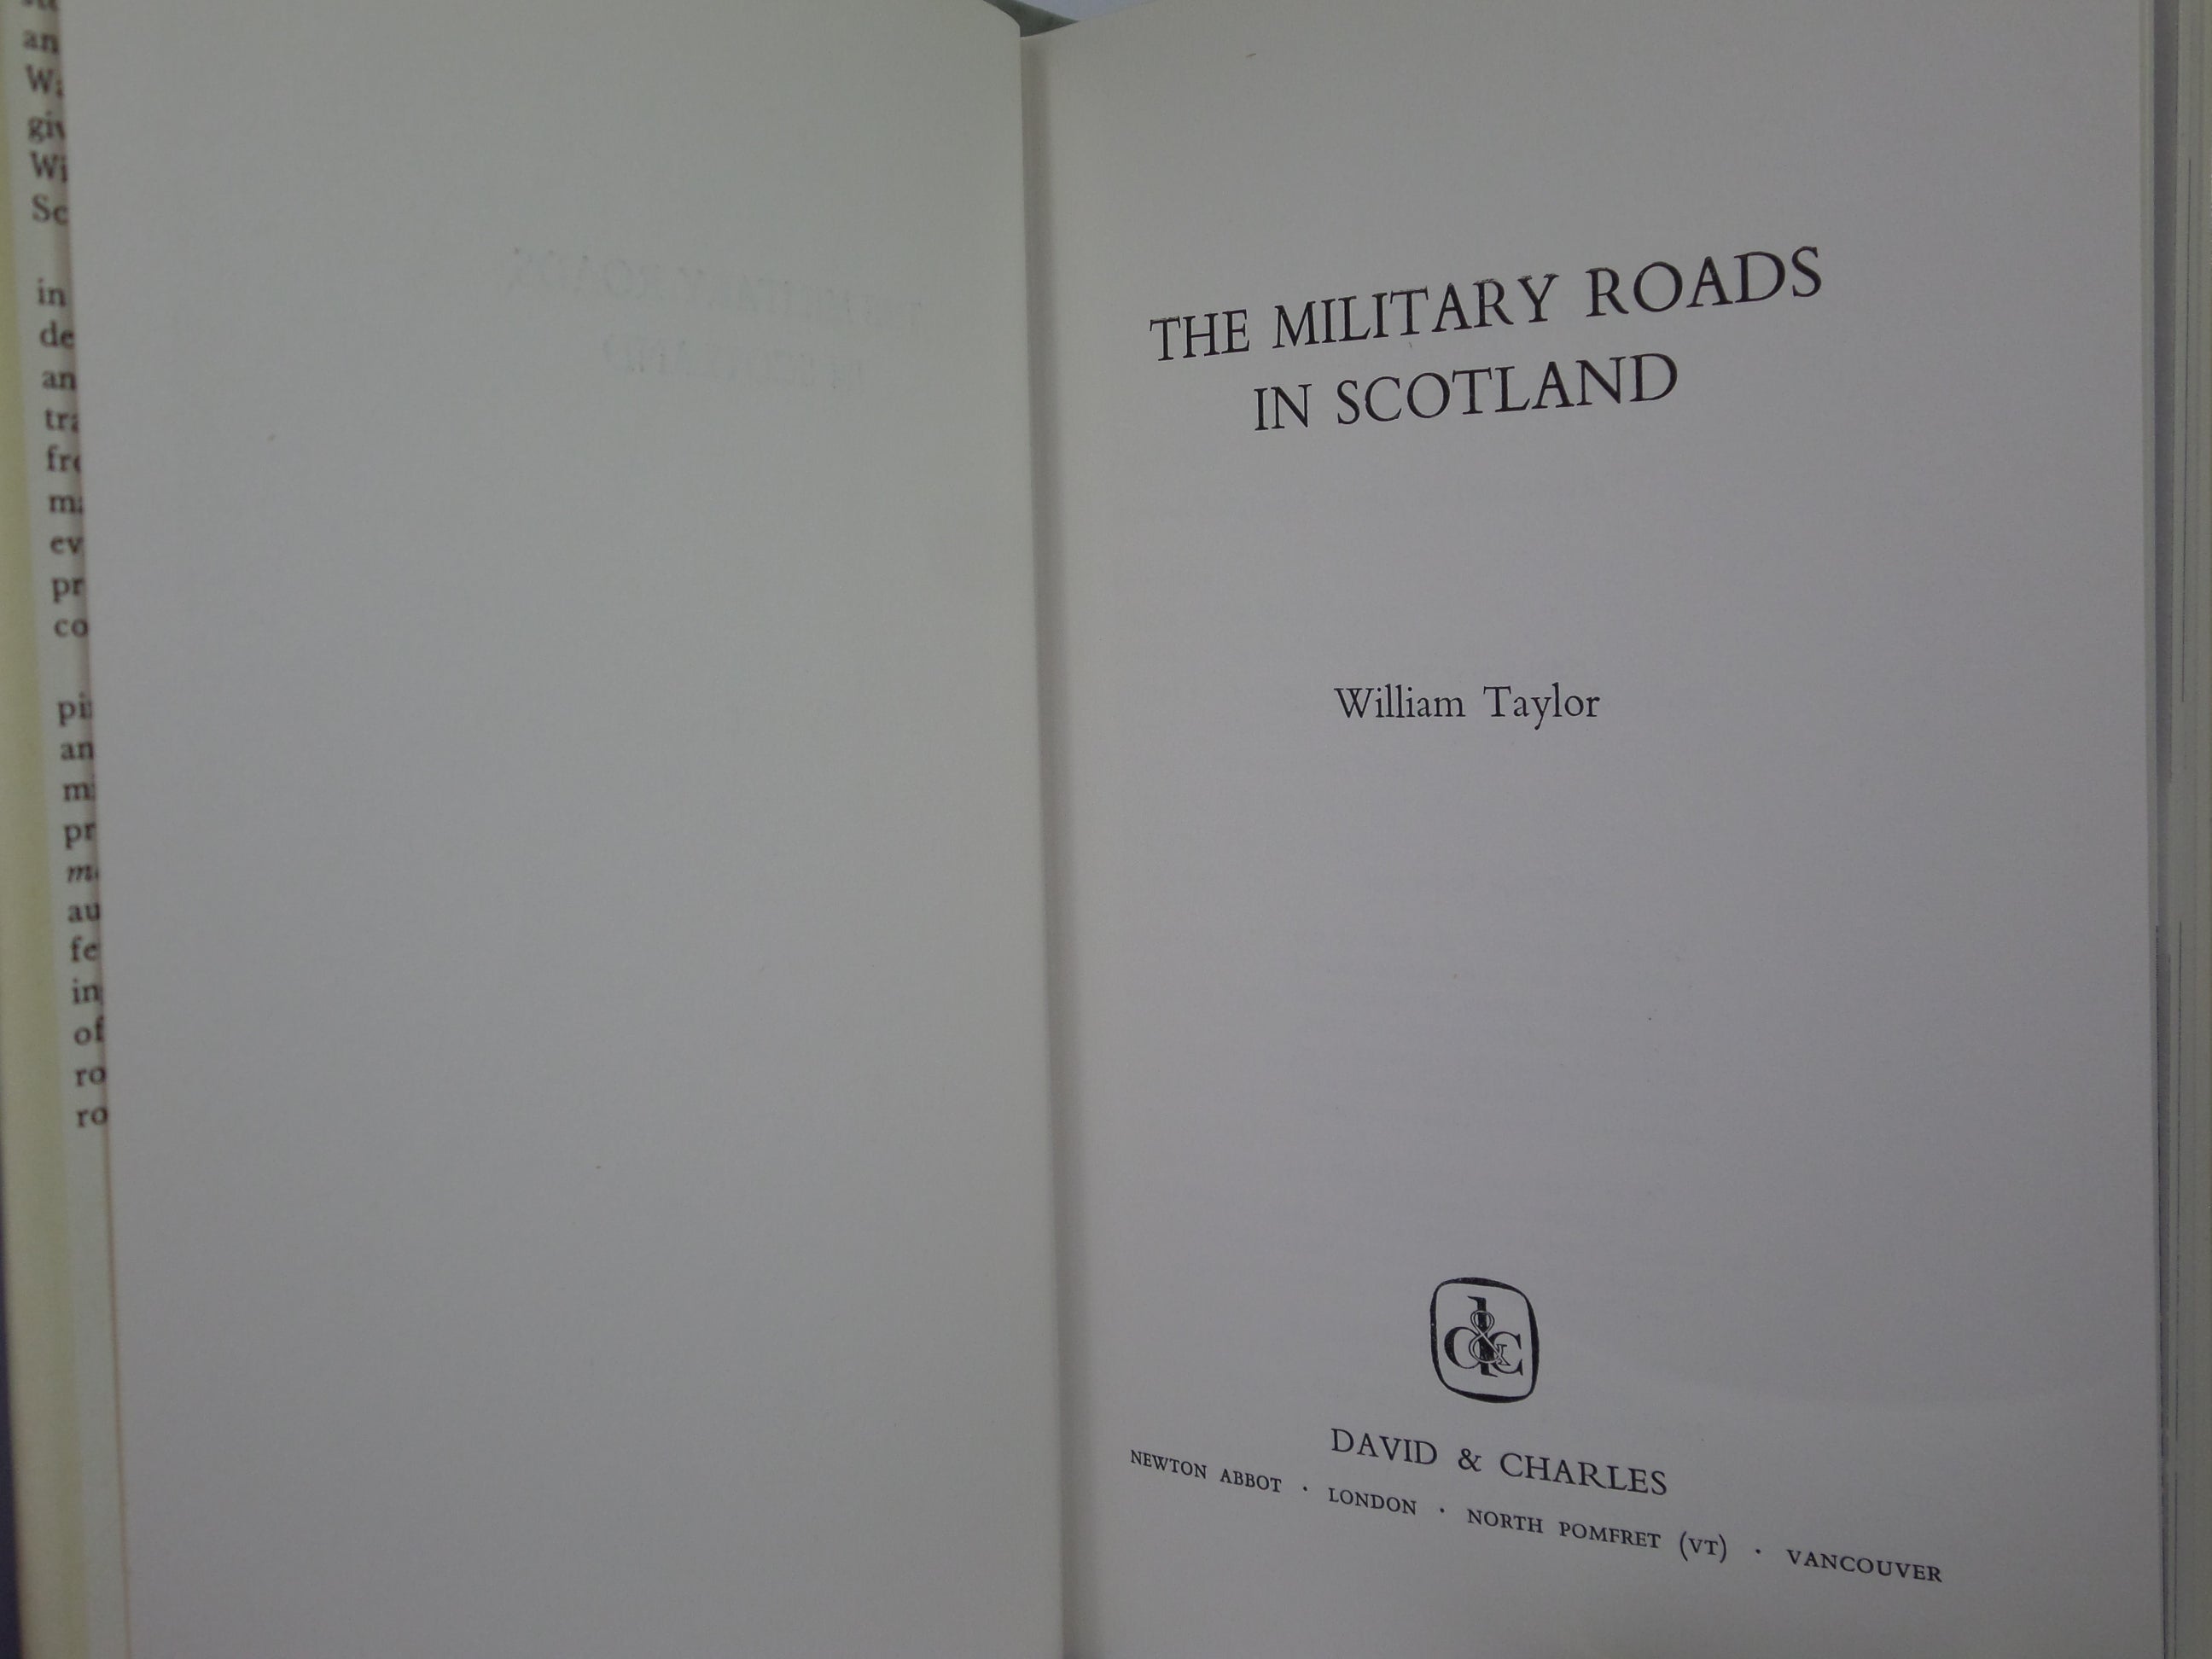 THE MILITARY ROADS IN SCOTLAND BY WILLIAM TAYLOR 1976 FIRST EDITION HARDCOVER